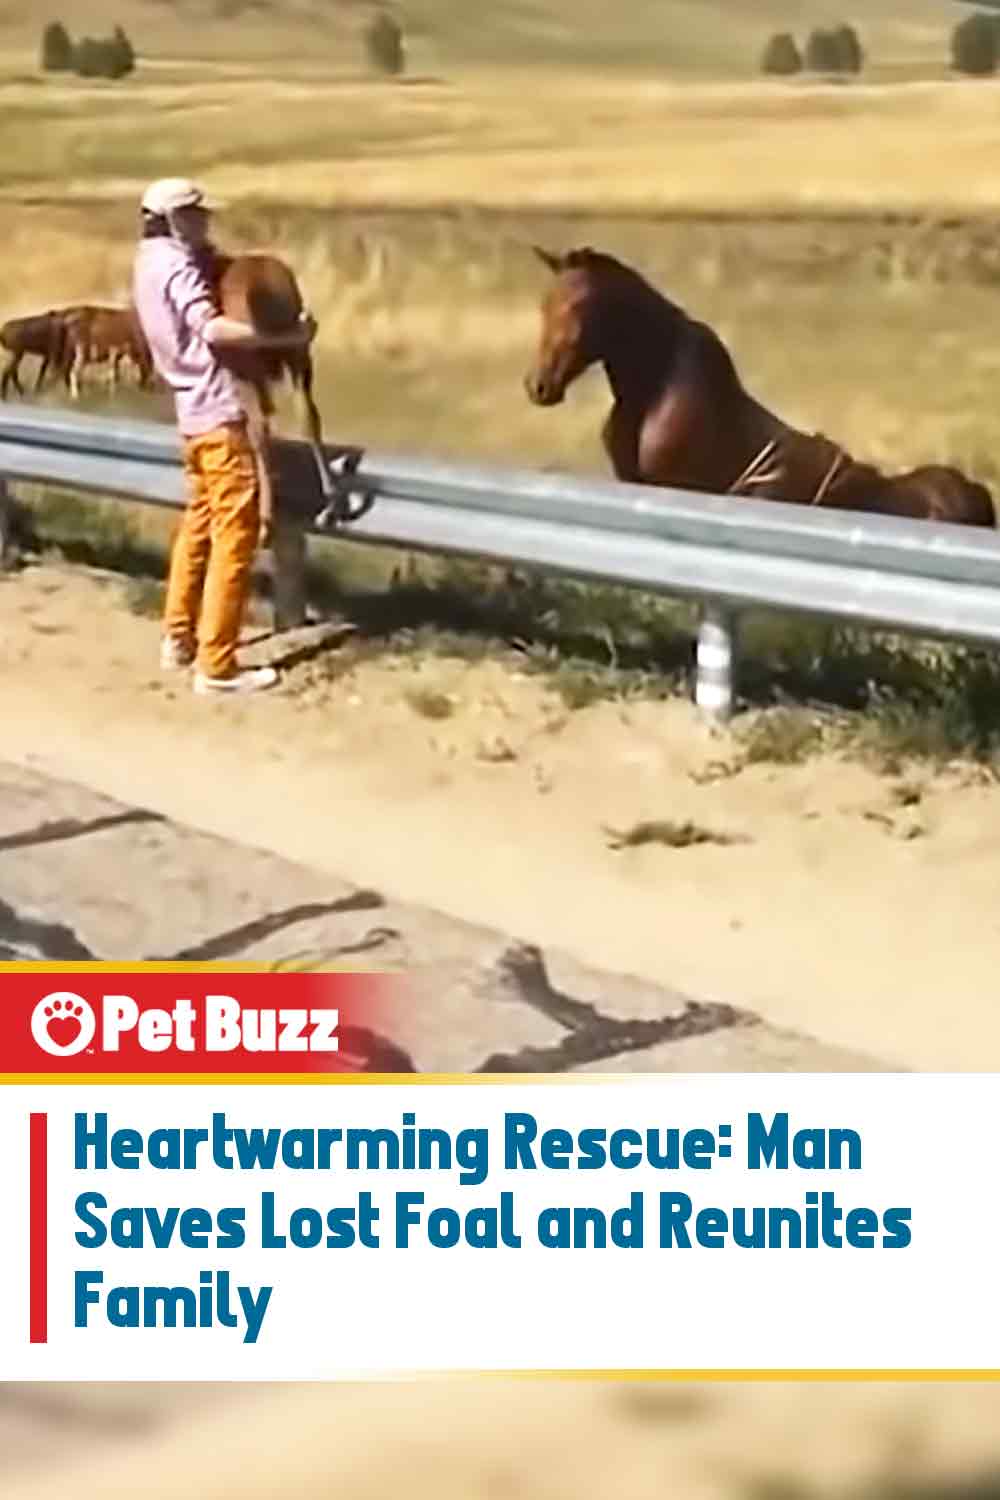 Heartwarming Rescue: Man Saves Lost Foal and Reunites Family